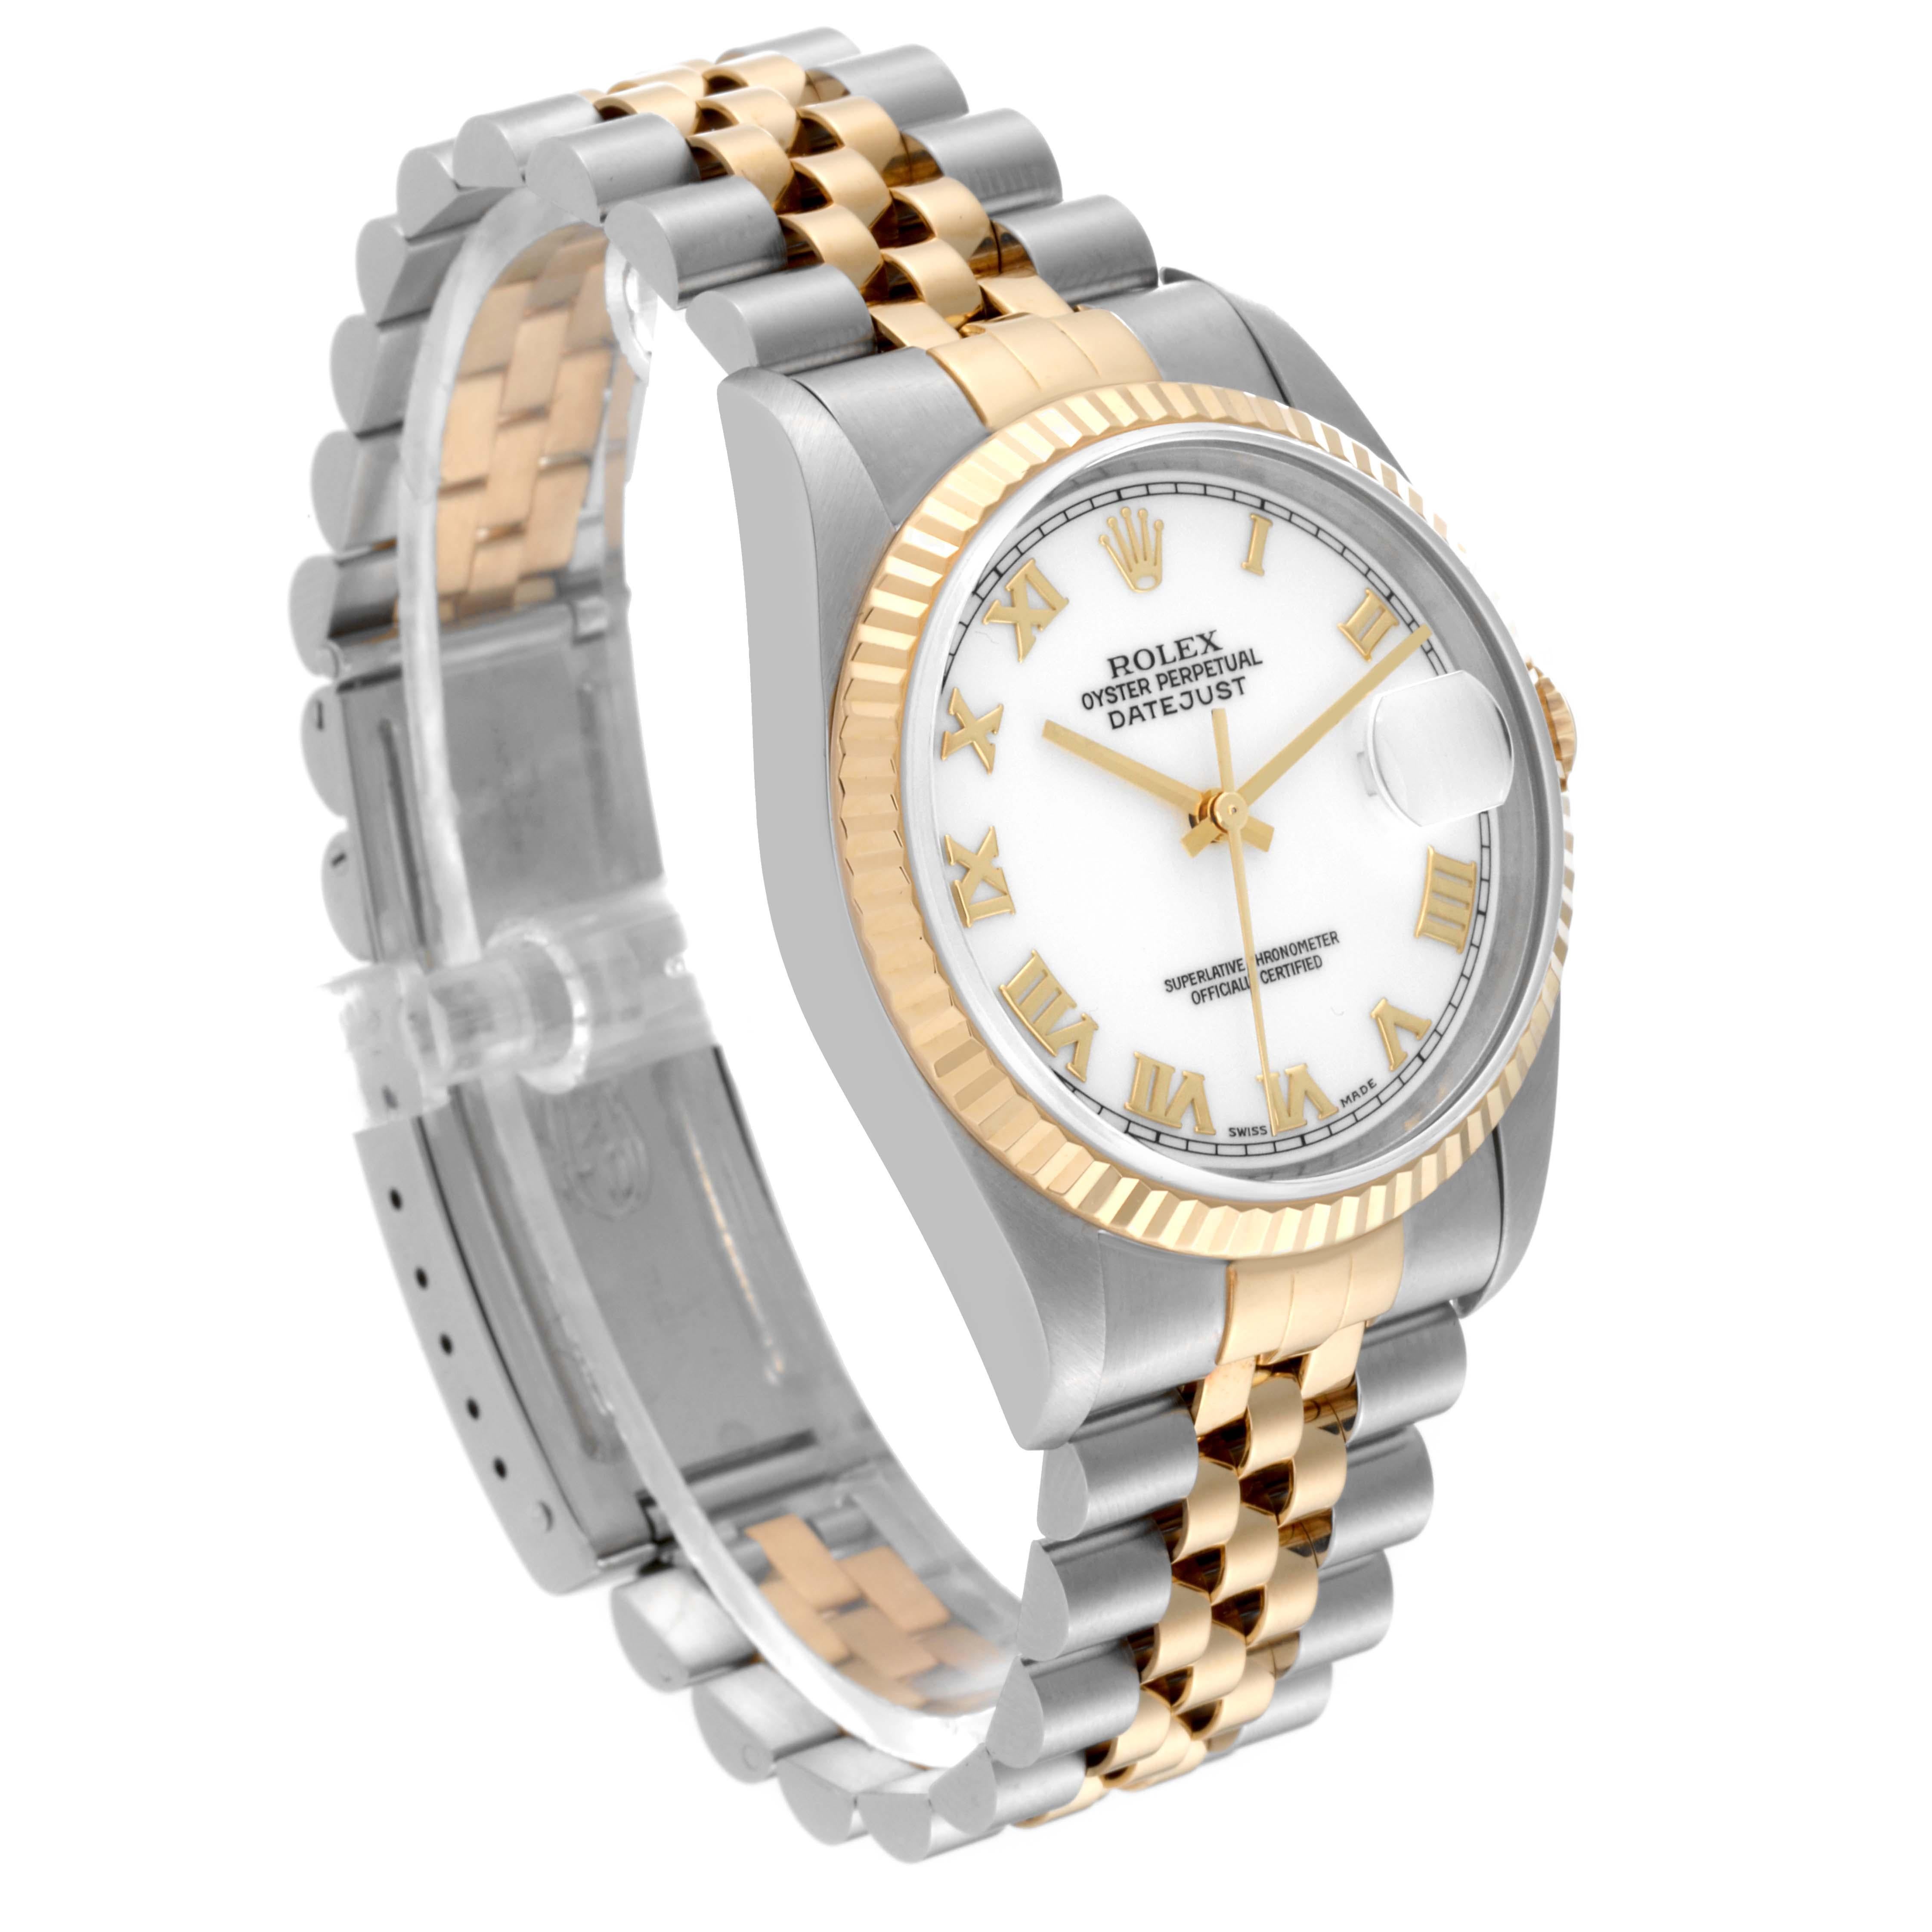 Rolex Datejust Steel Yellow Gold White Dial Mens Watch 16233 For Sale 2